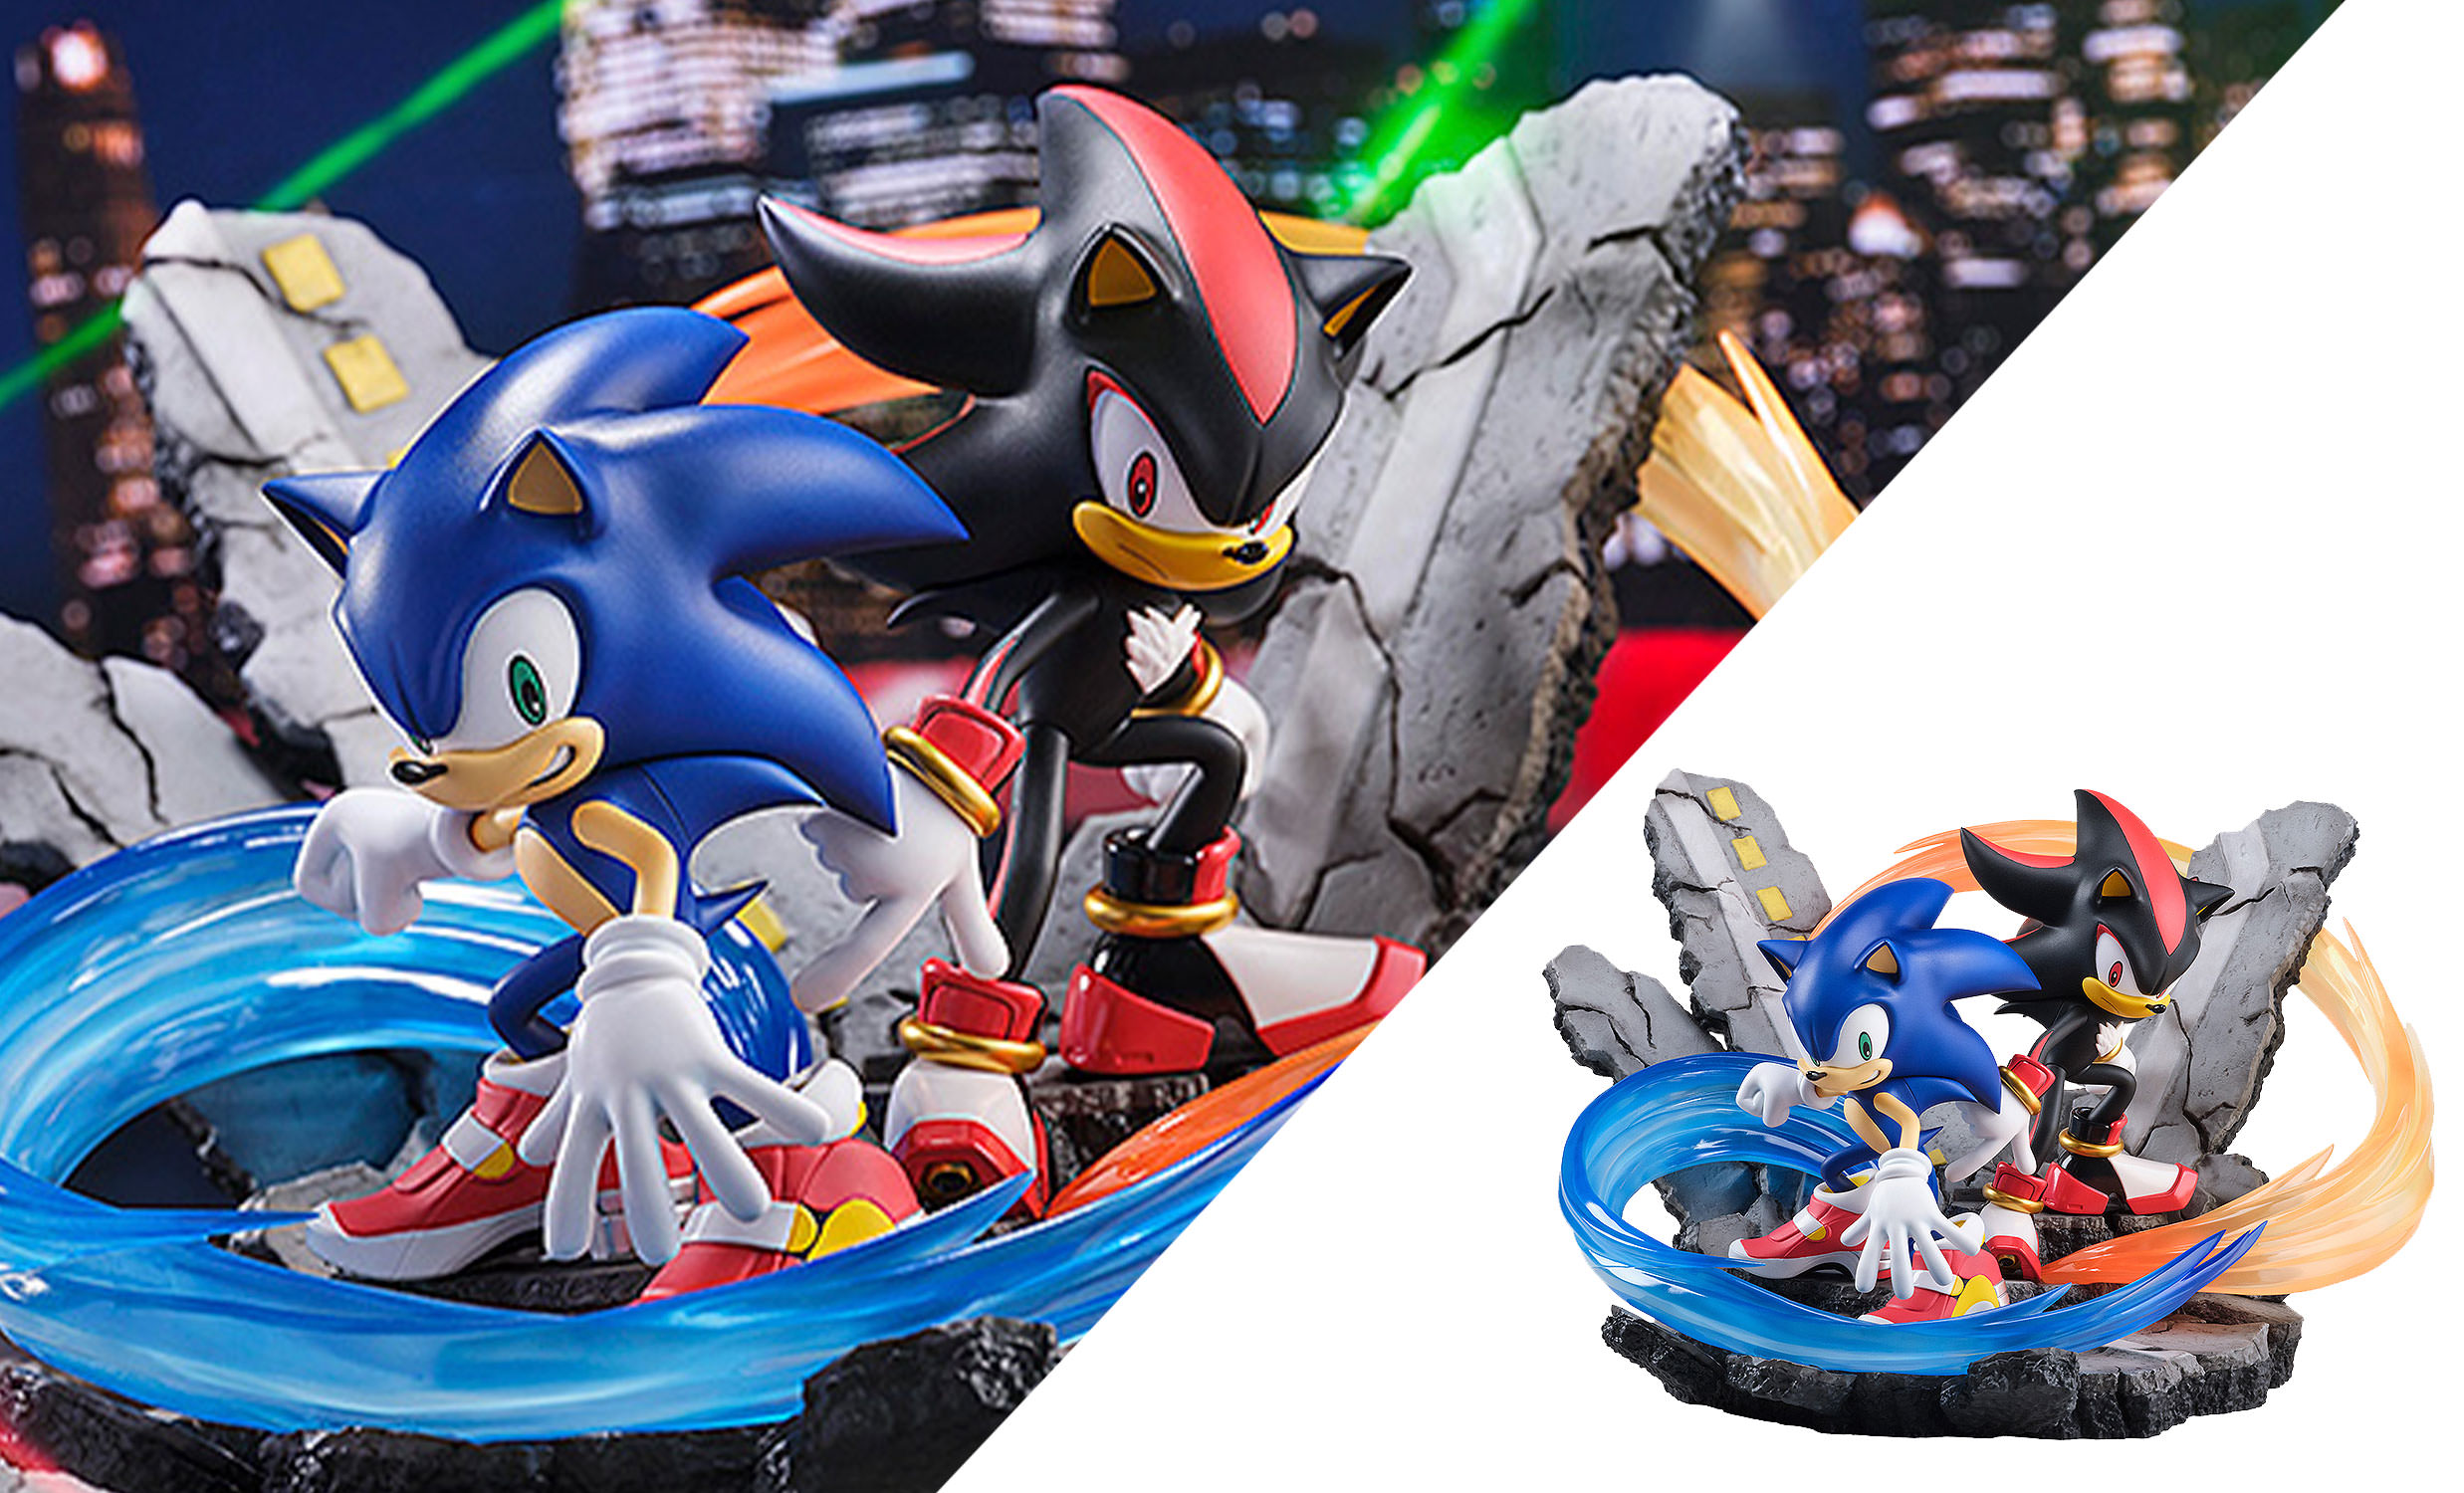 S-FIRE(エスファイア)公式 on X: From Sonic Adventure 2, Sonic the Hedgehog and  Shadow the Hedgehog have been sculpted into one incredible figure for  S-FIRE, the innovative SEGA hobby brand. Pre-order starts from June